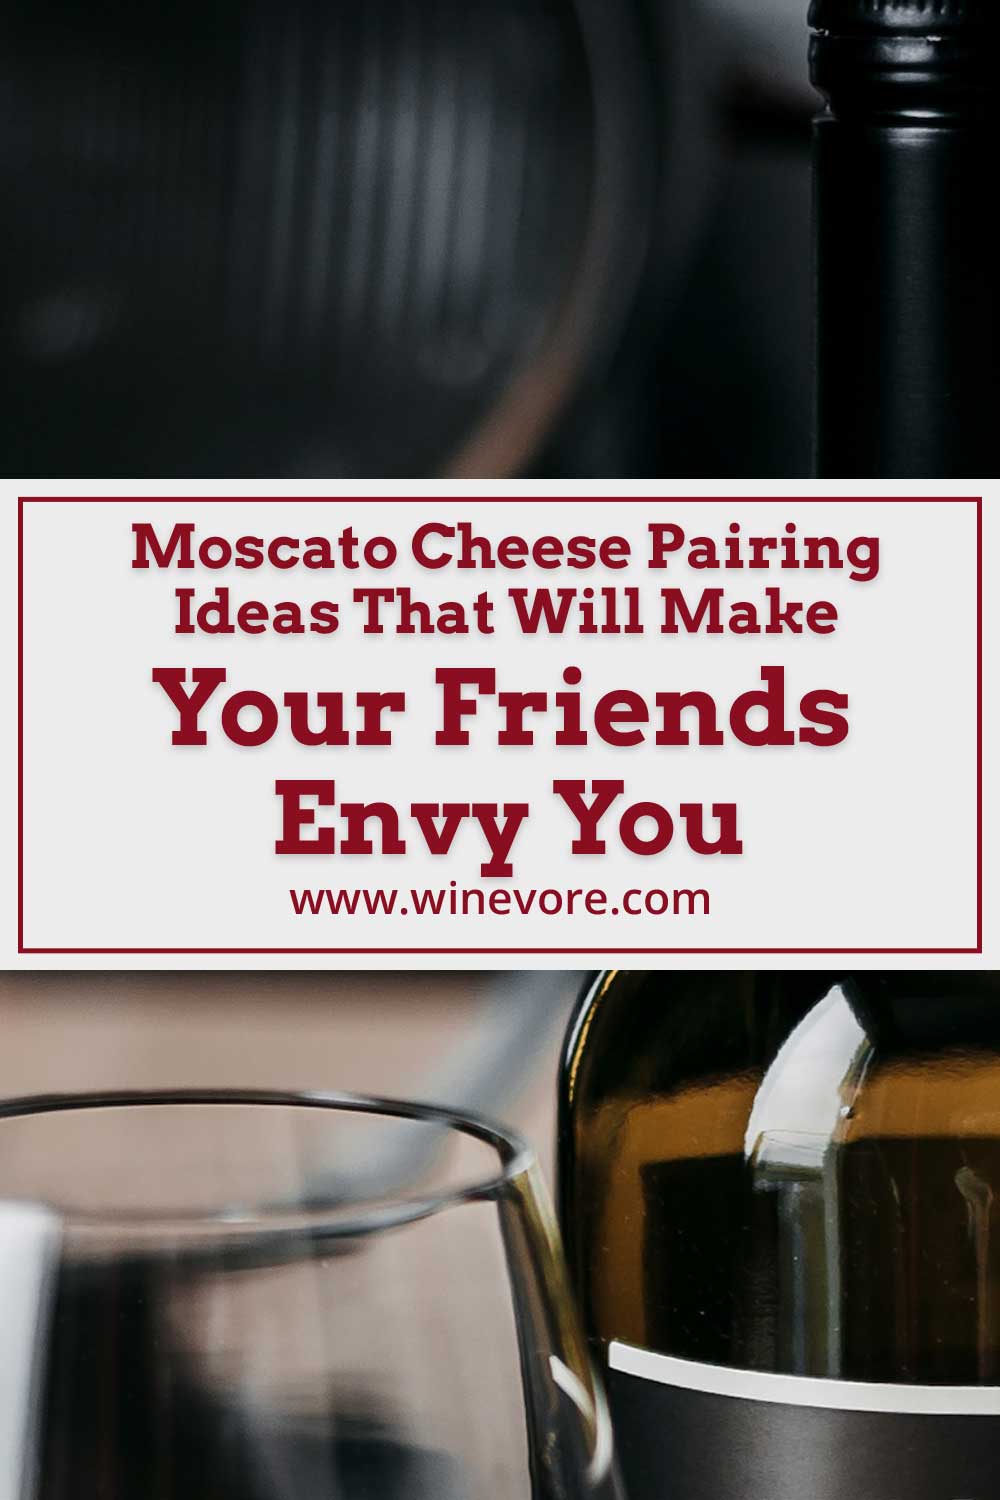 Wine glass and bottle placed together - Moscato Cheese Pairing Ideas.